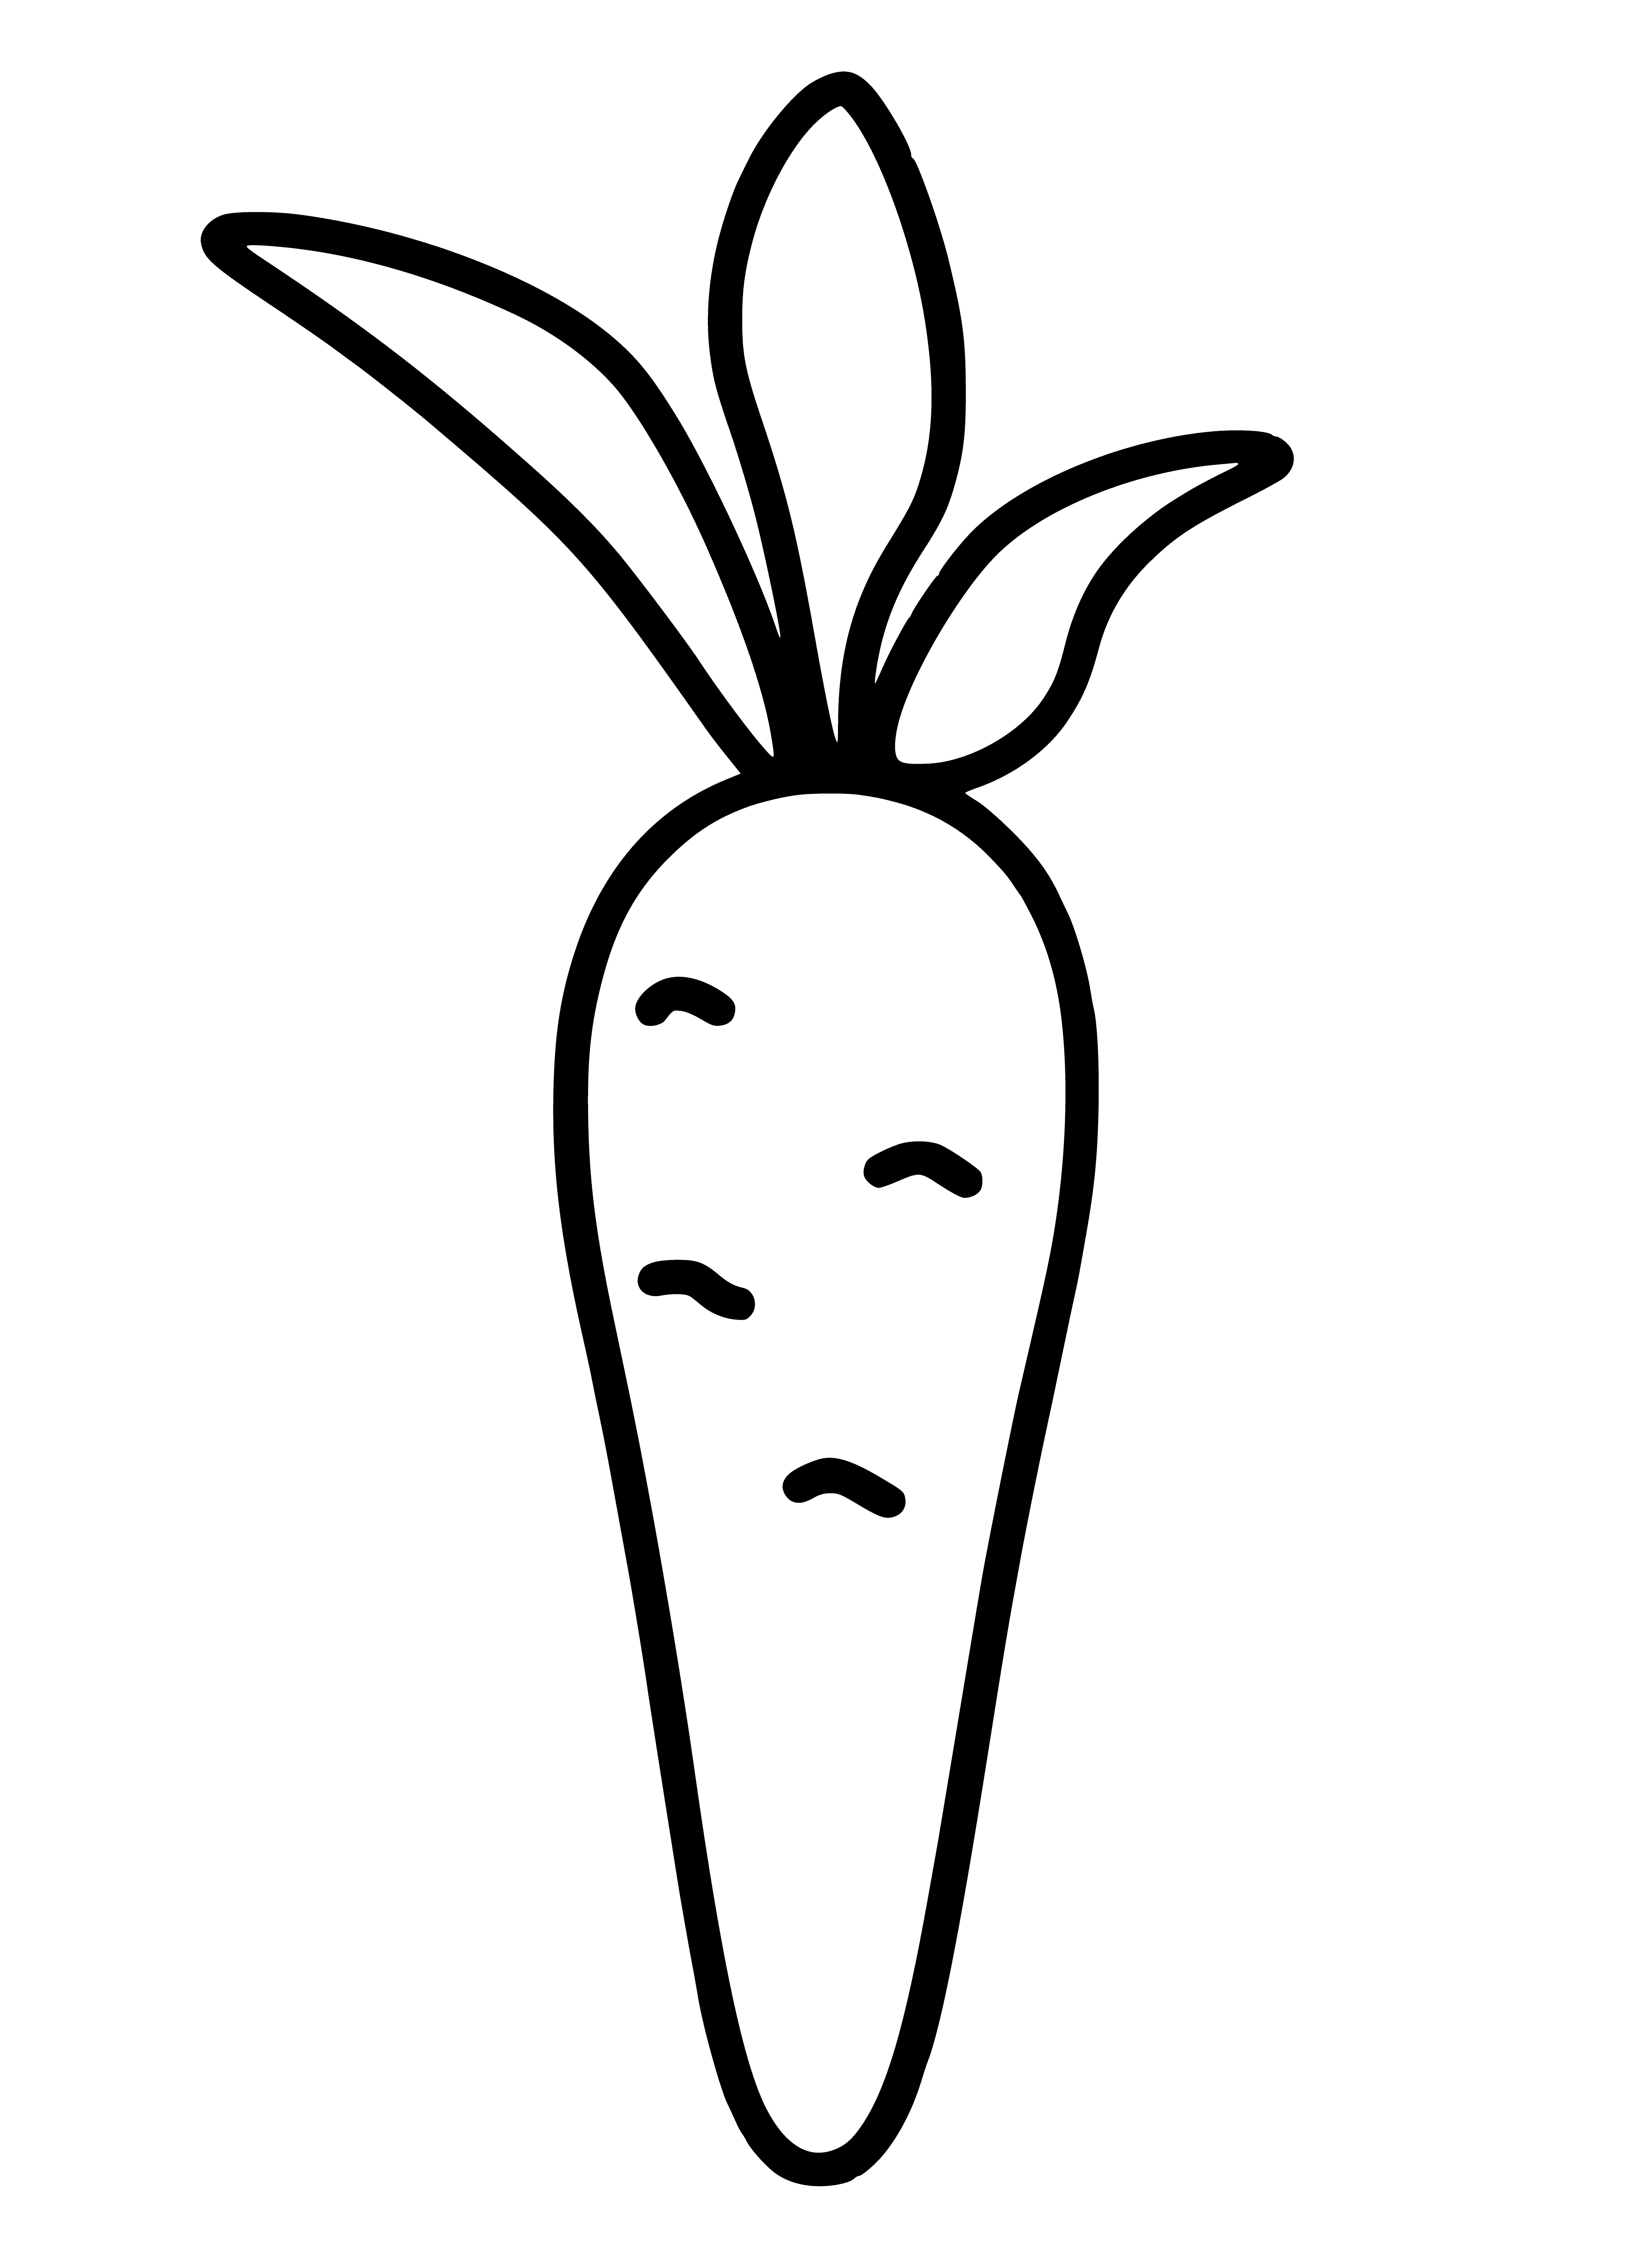 Carrot coloring page